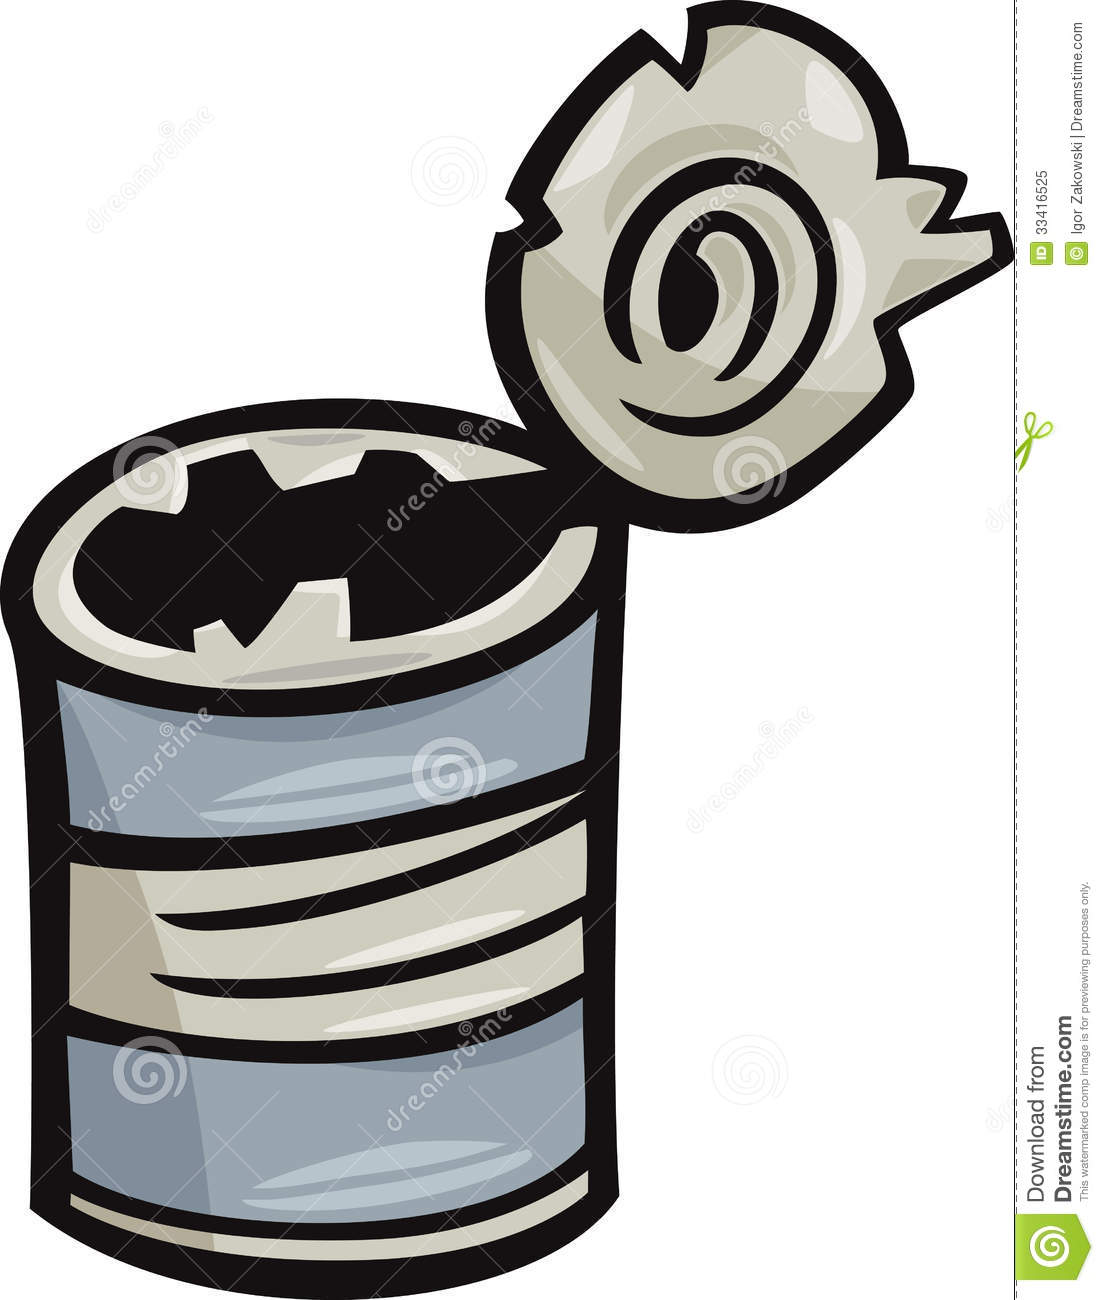 Soup Can Clipart   Clipart Panda   Free Clipart Images